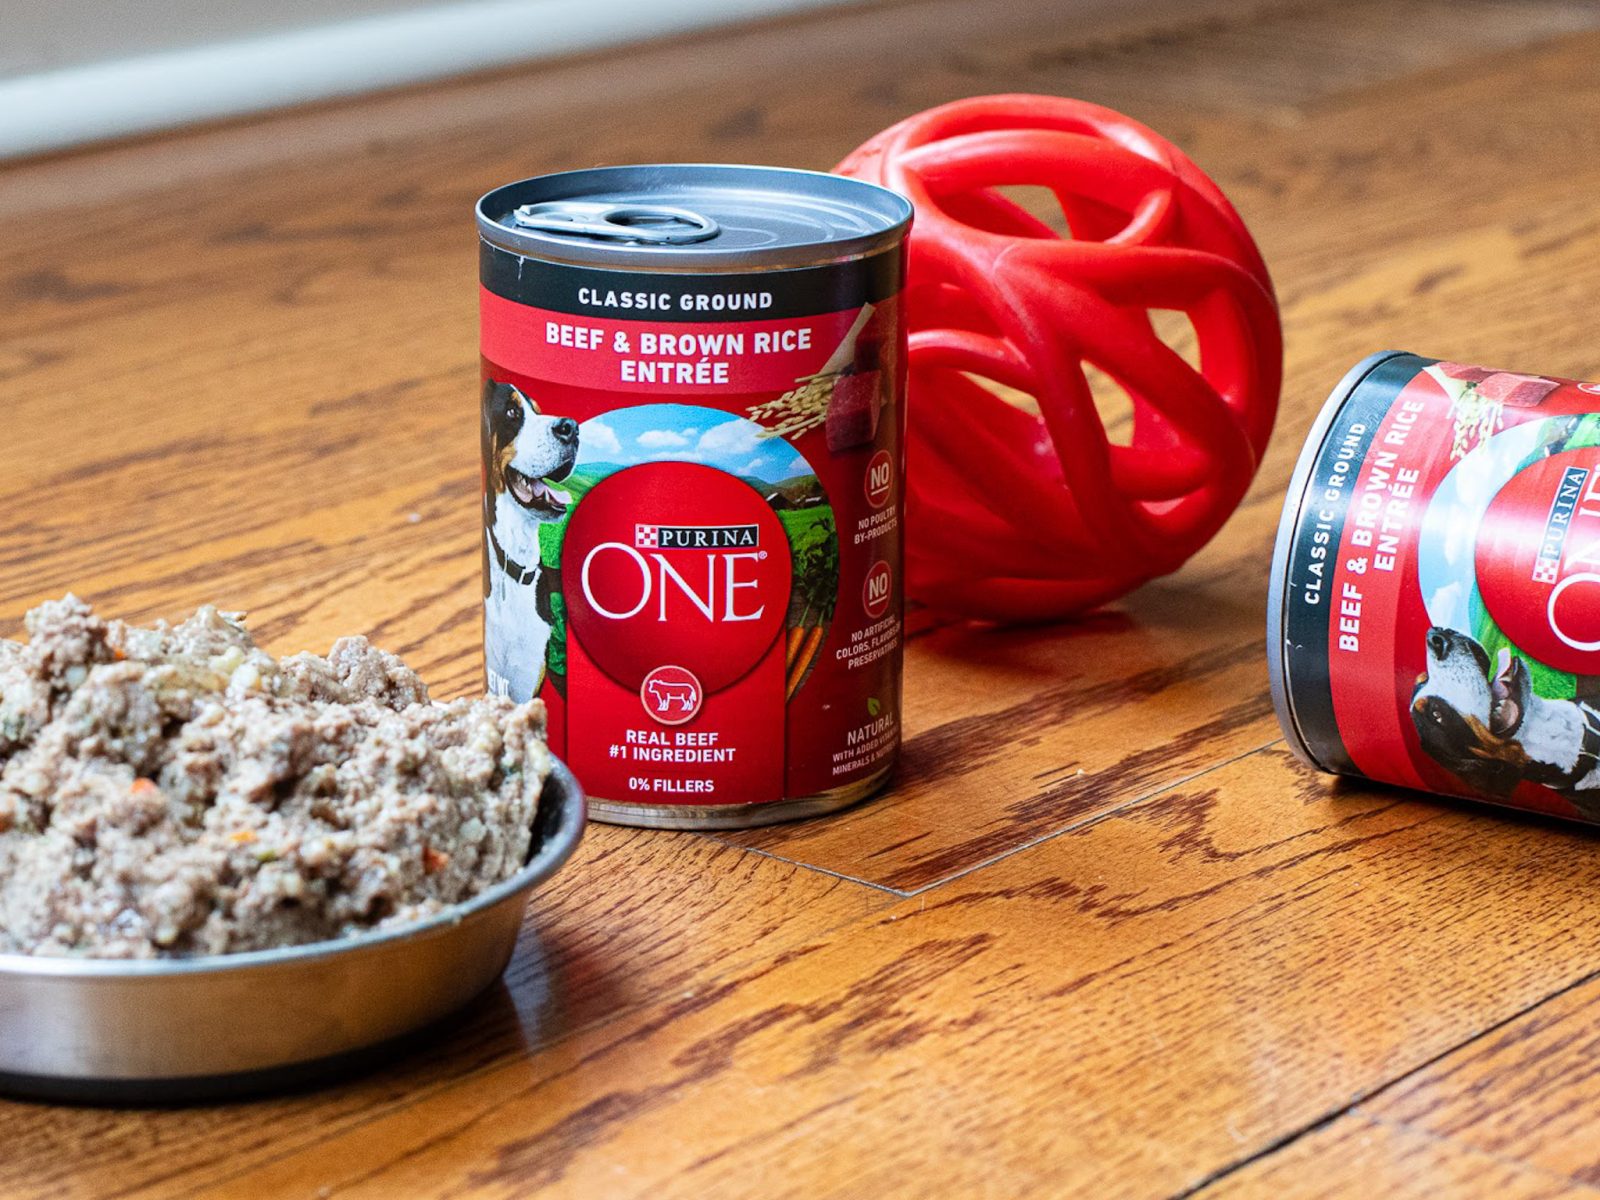 Get The Cans Of Purina One Wet Dog Food For Just $1.46 At Kroger